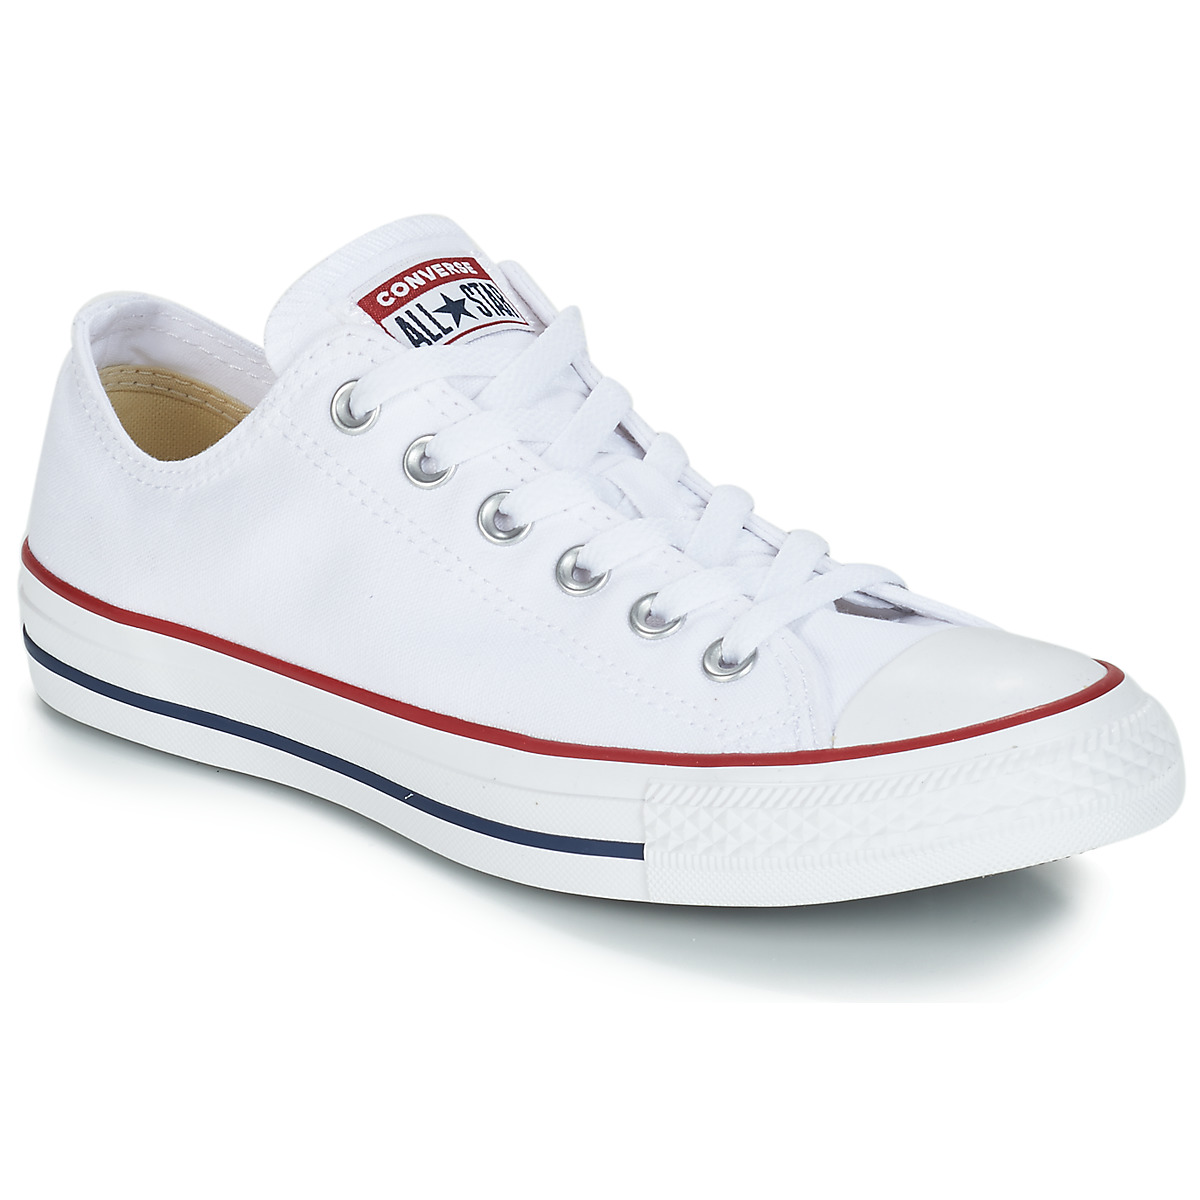 Converse ALL STAR CORE OX White / Optical - Free Delivery with  Rubbersole.co.uk ! - Shoes Low top trainers £ 48.99